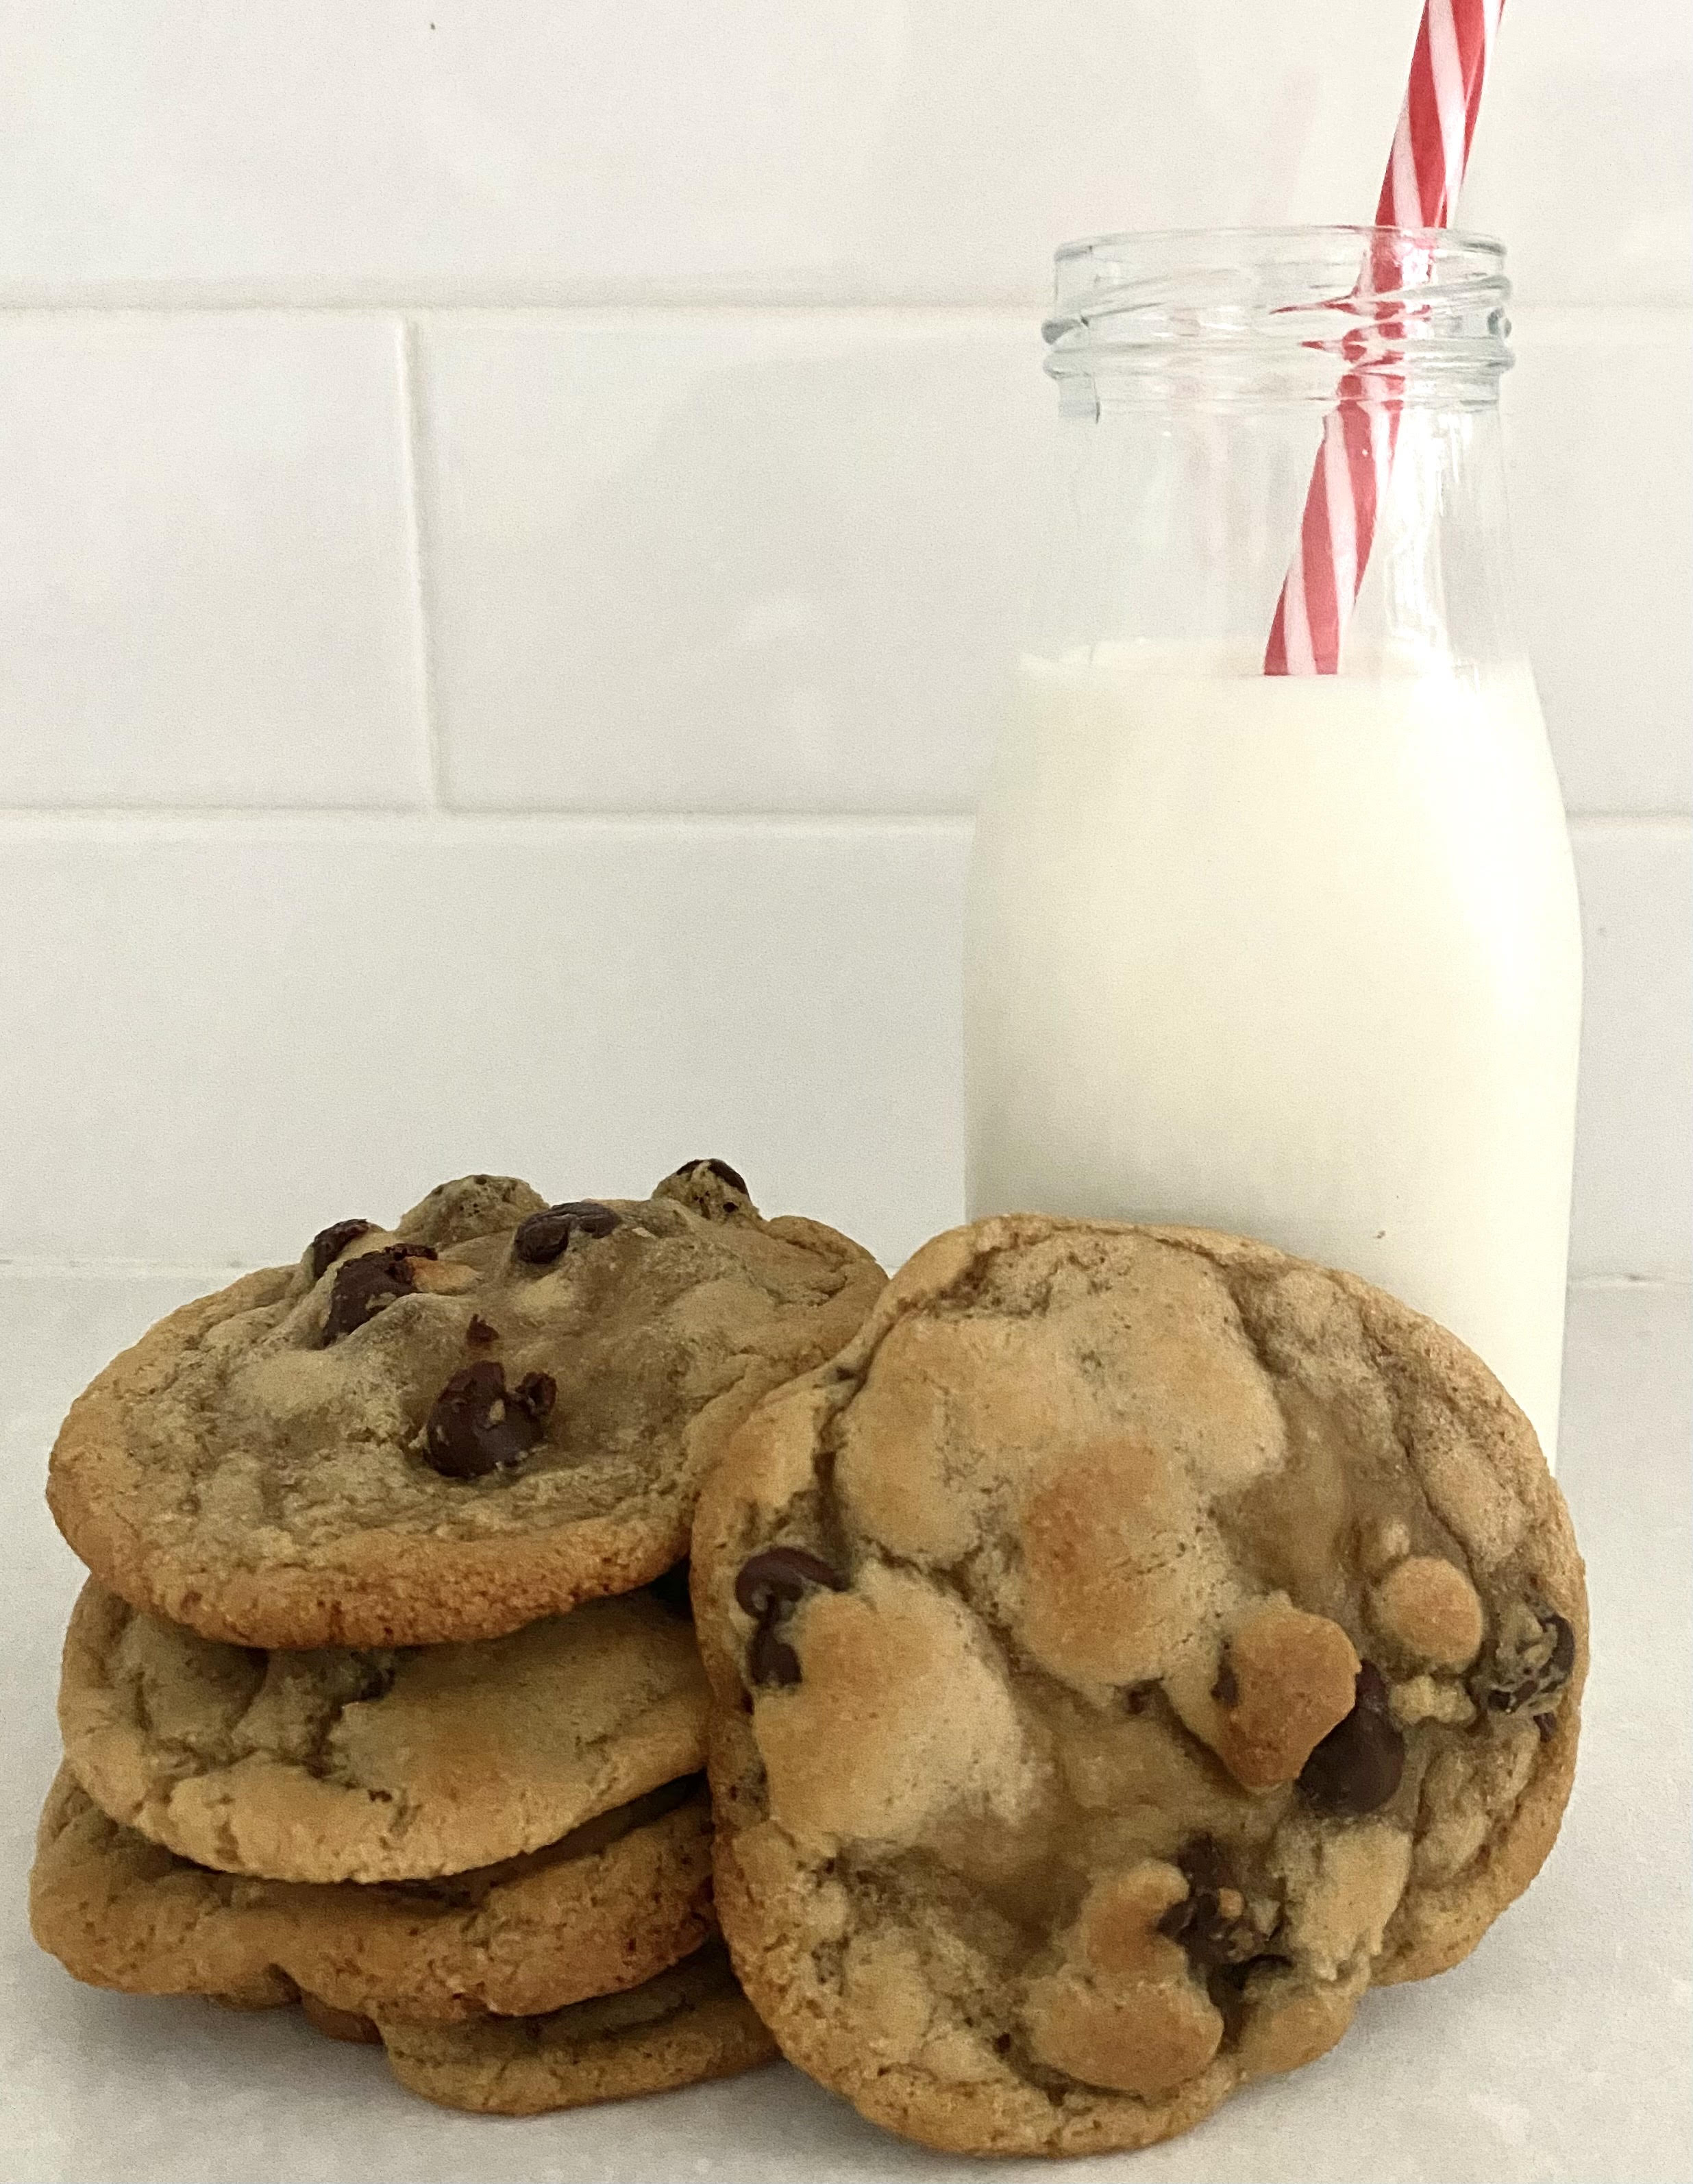 Joanna Gaines Chocolate Chip Cookie Recipe from the Magnolia Table